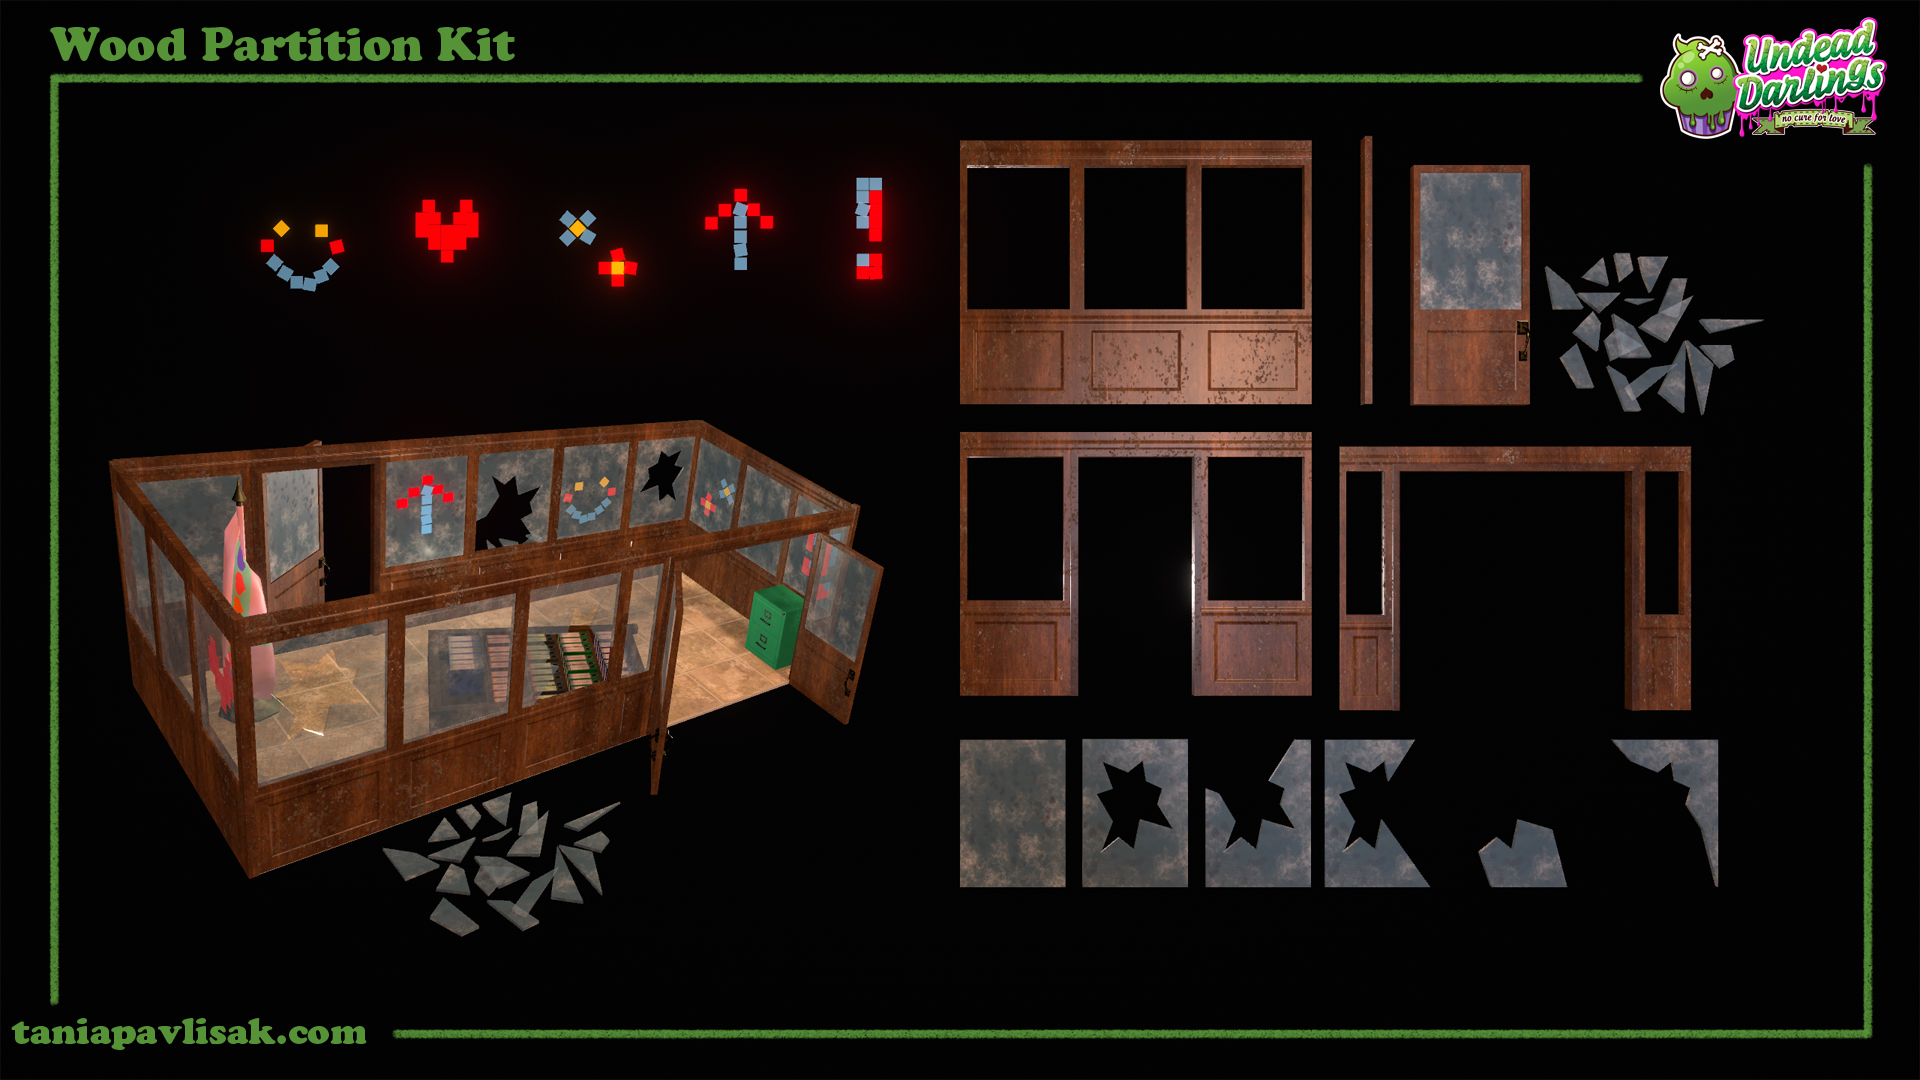 Wood partition kit inspired by Resident Evil police station.